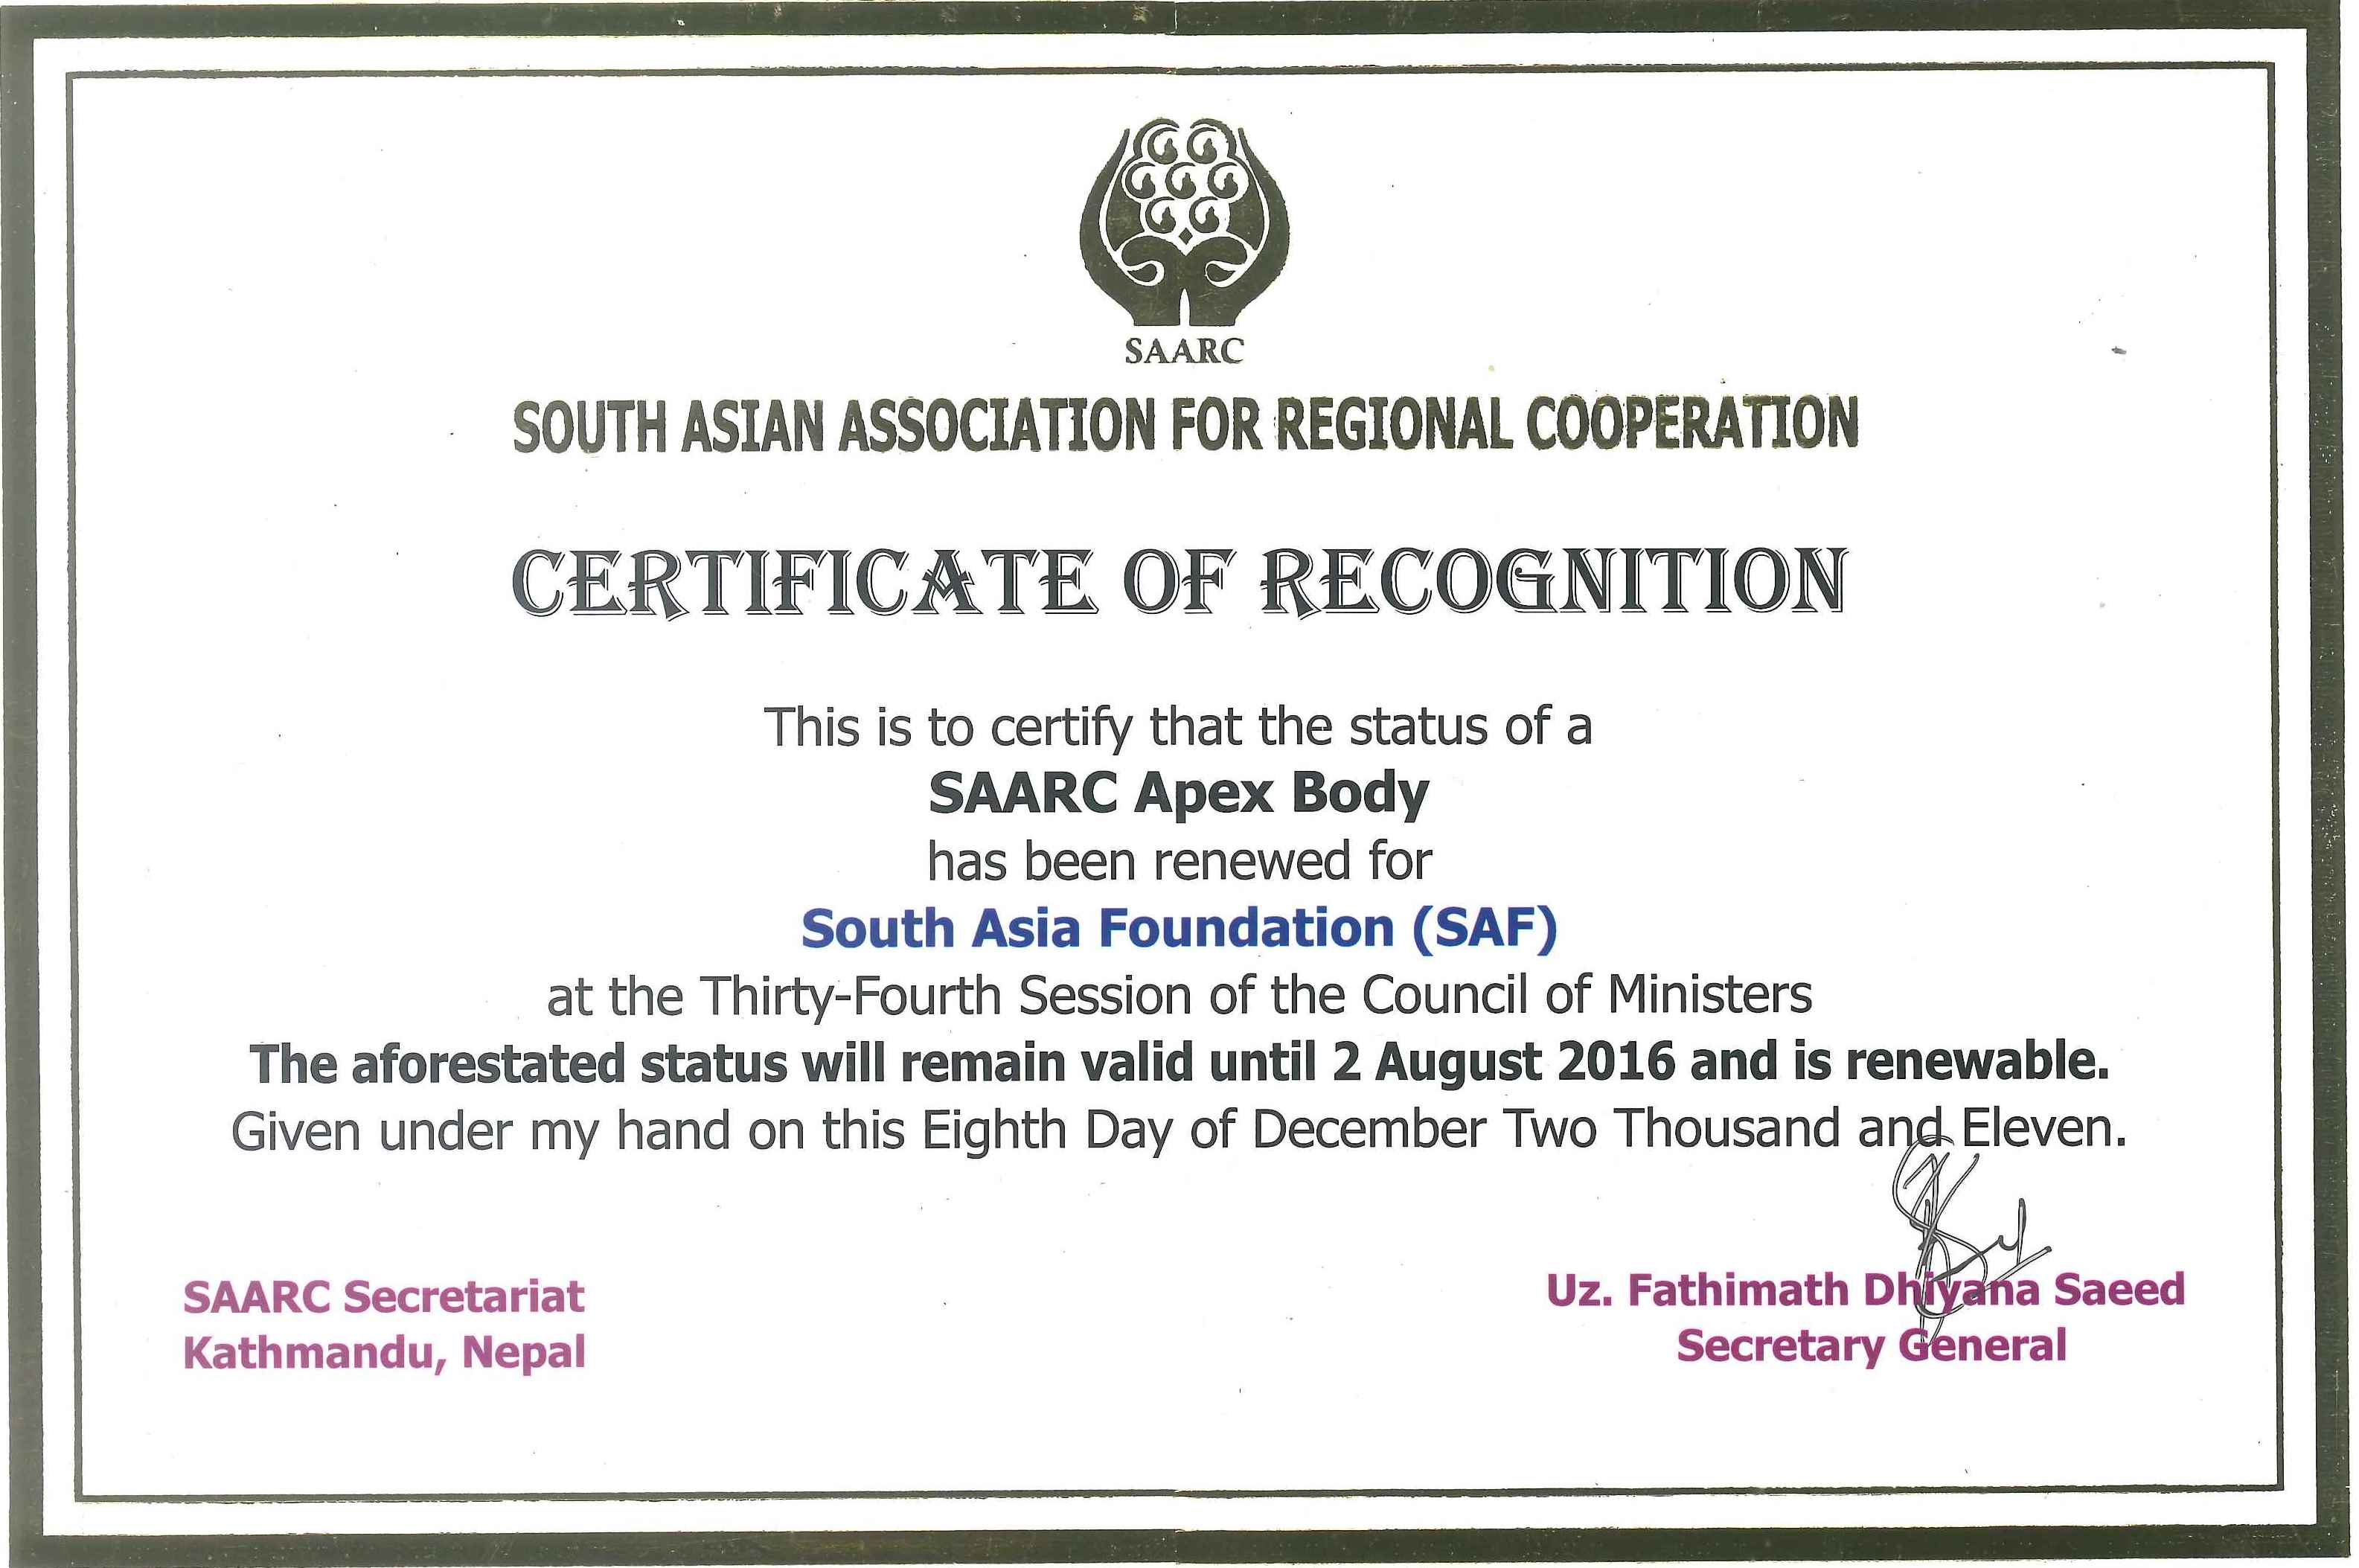 South Asia Foundation India SAARC Certificate Renewal for another 5 Years till 2 Aug 2016